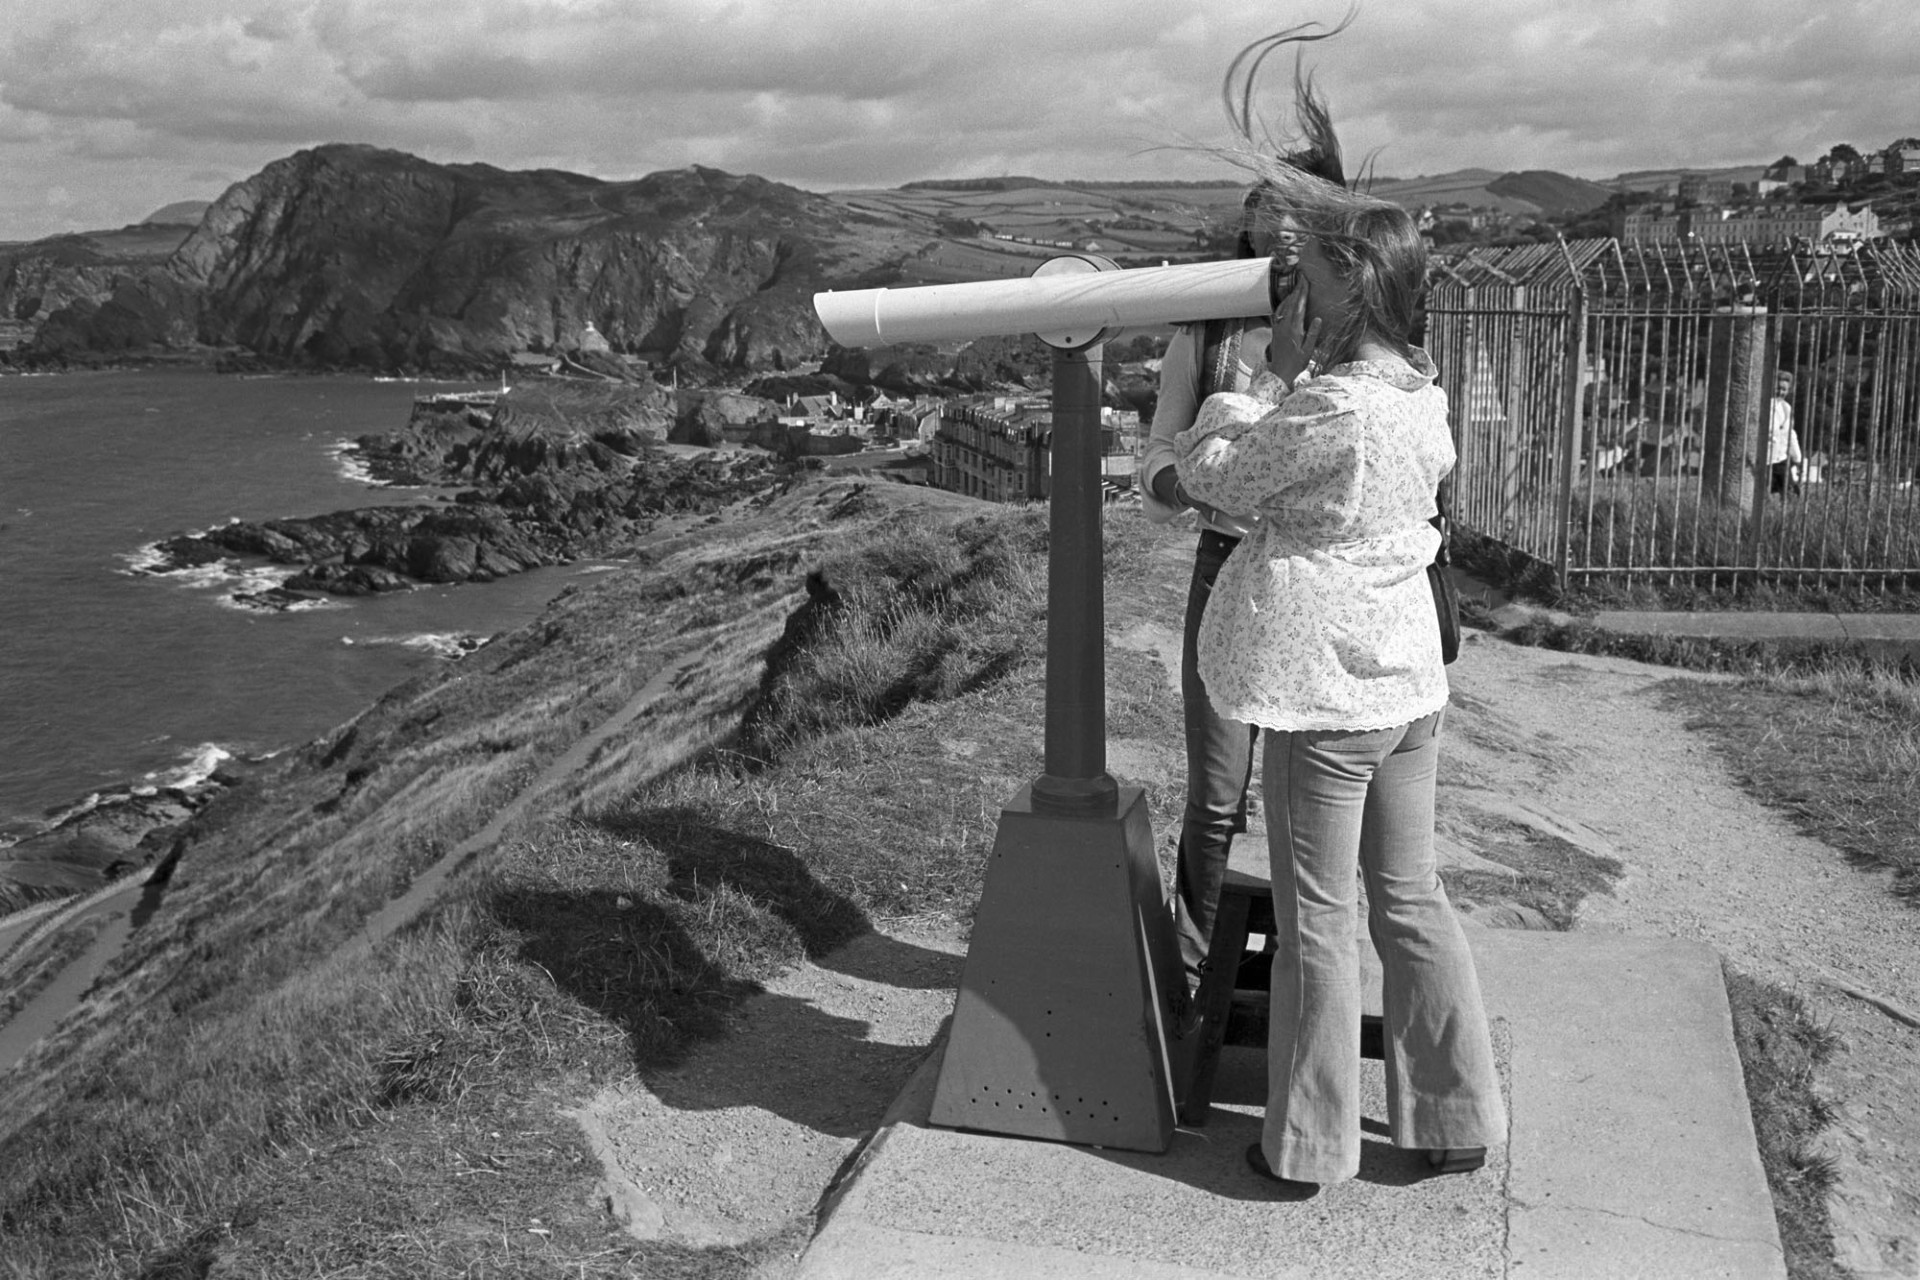 Couple looking through telescope, cliffs and sea.
[A man and woman looking through a telescope on top of a cliff at the coastline below, at Ilfracombe.]